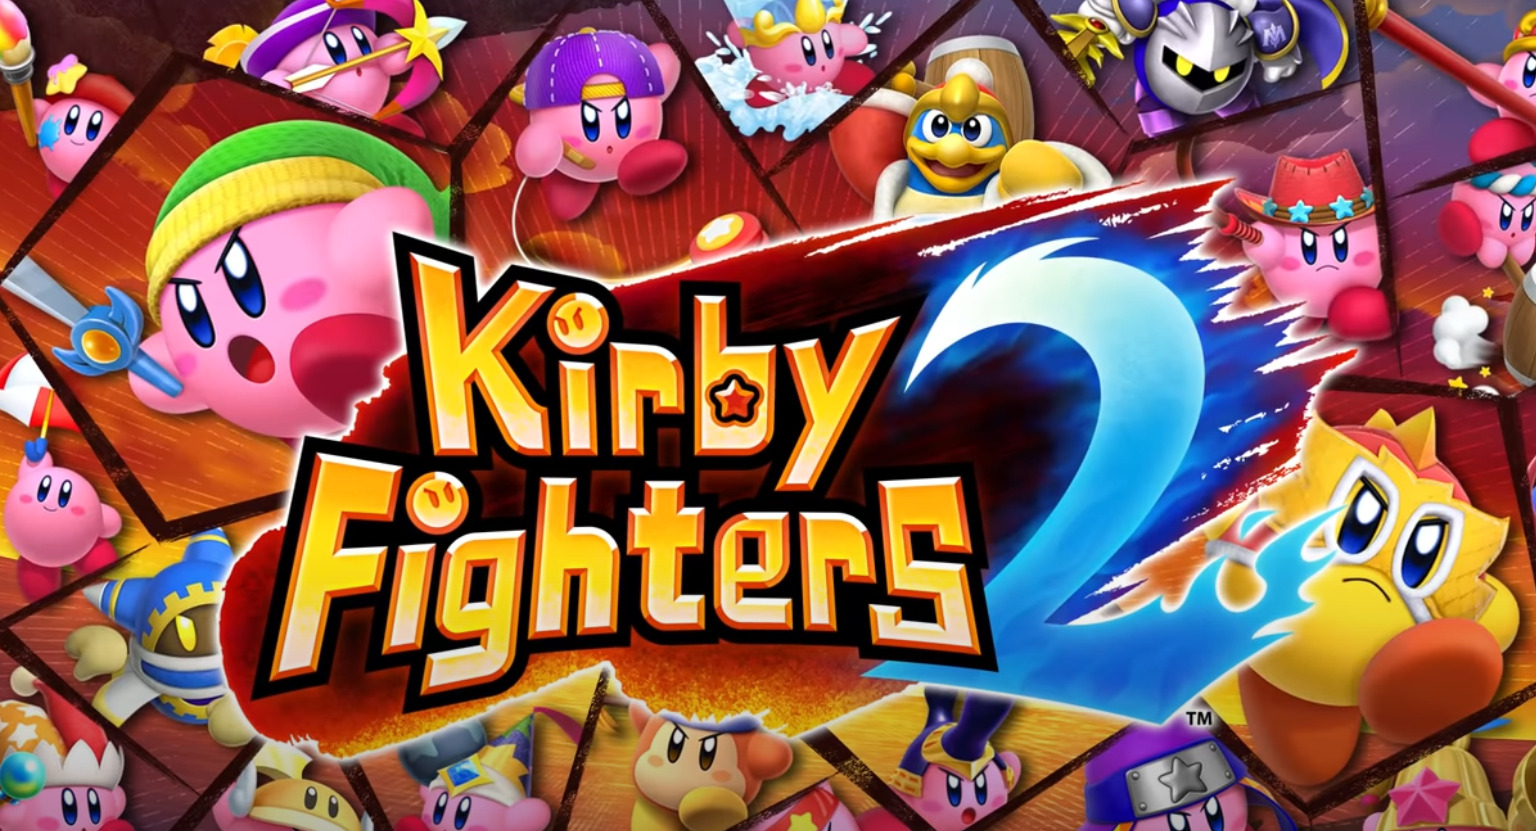 Nintendo Announces And Launches Kirby Fighters 2 On The Nintendo Switch Via The Nintendo Eshop This Week